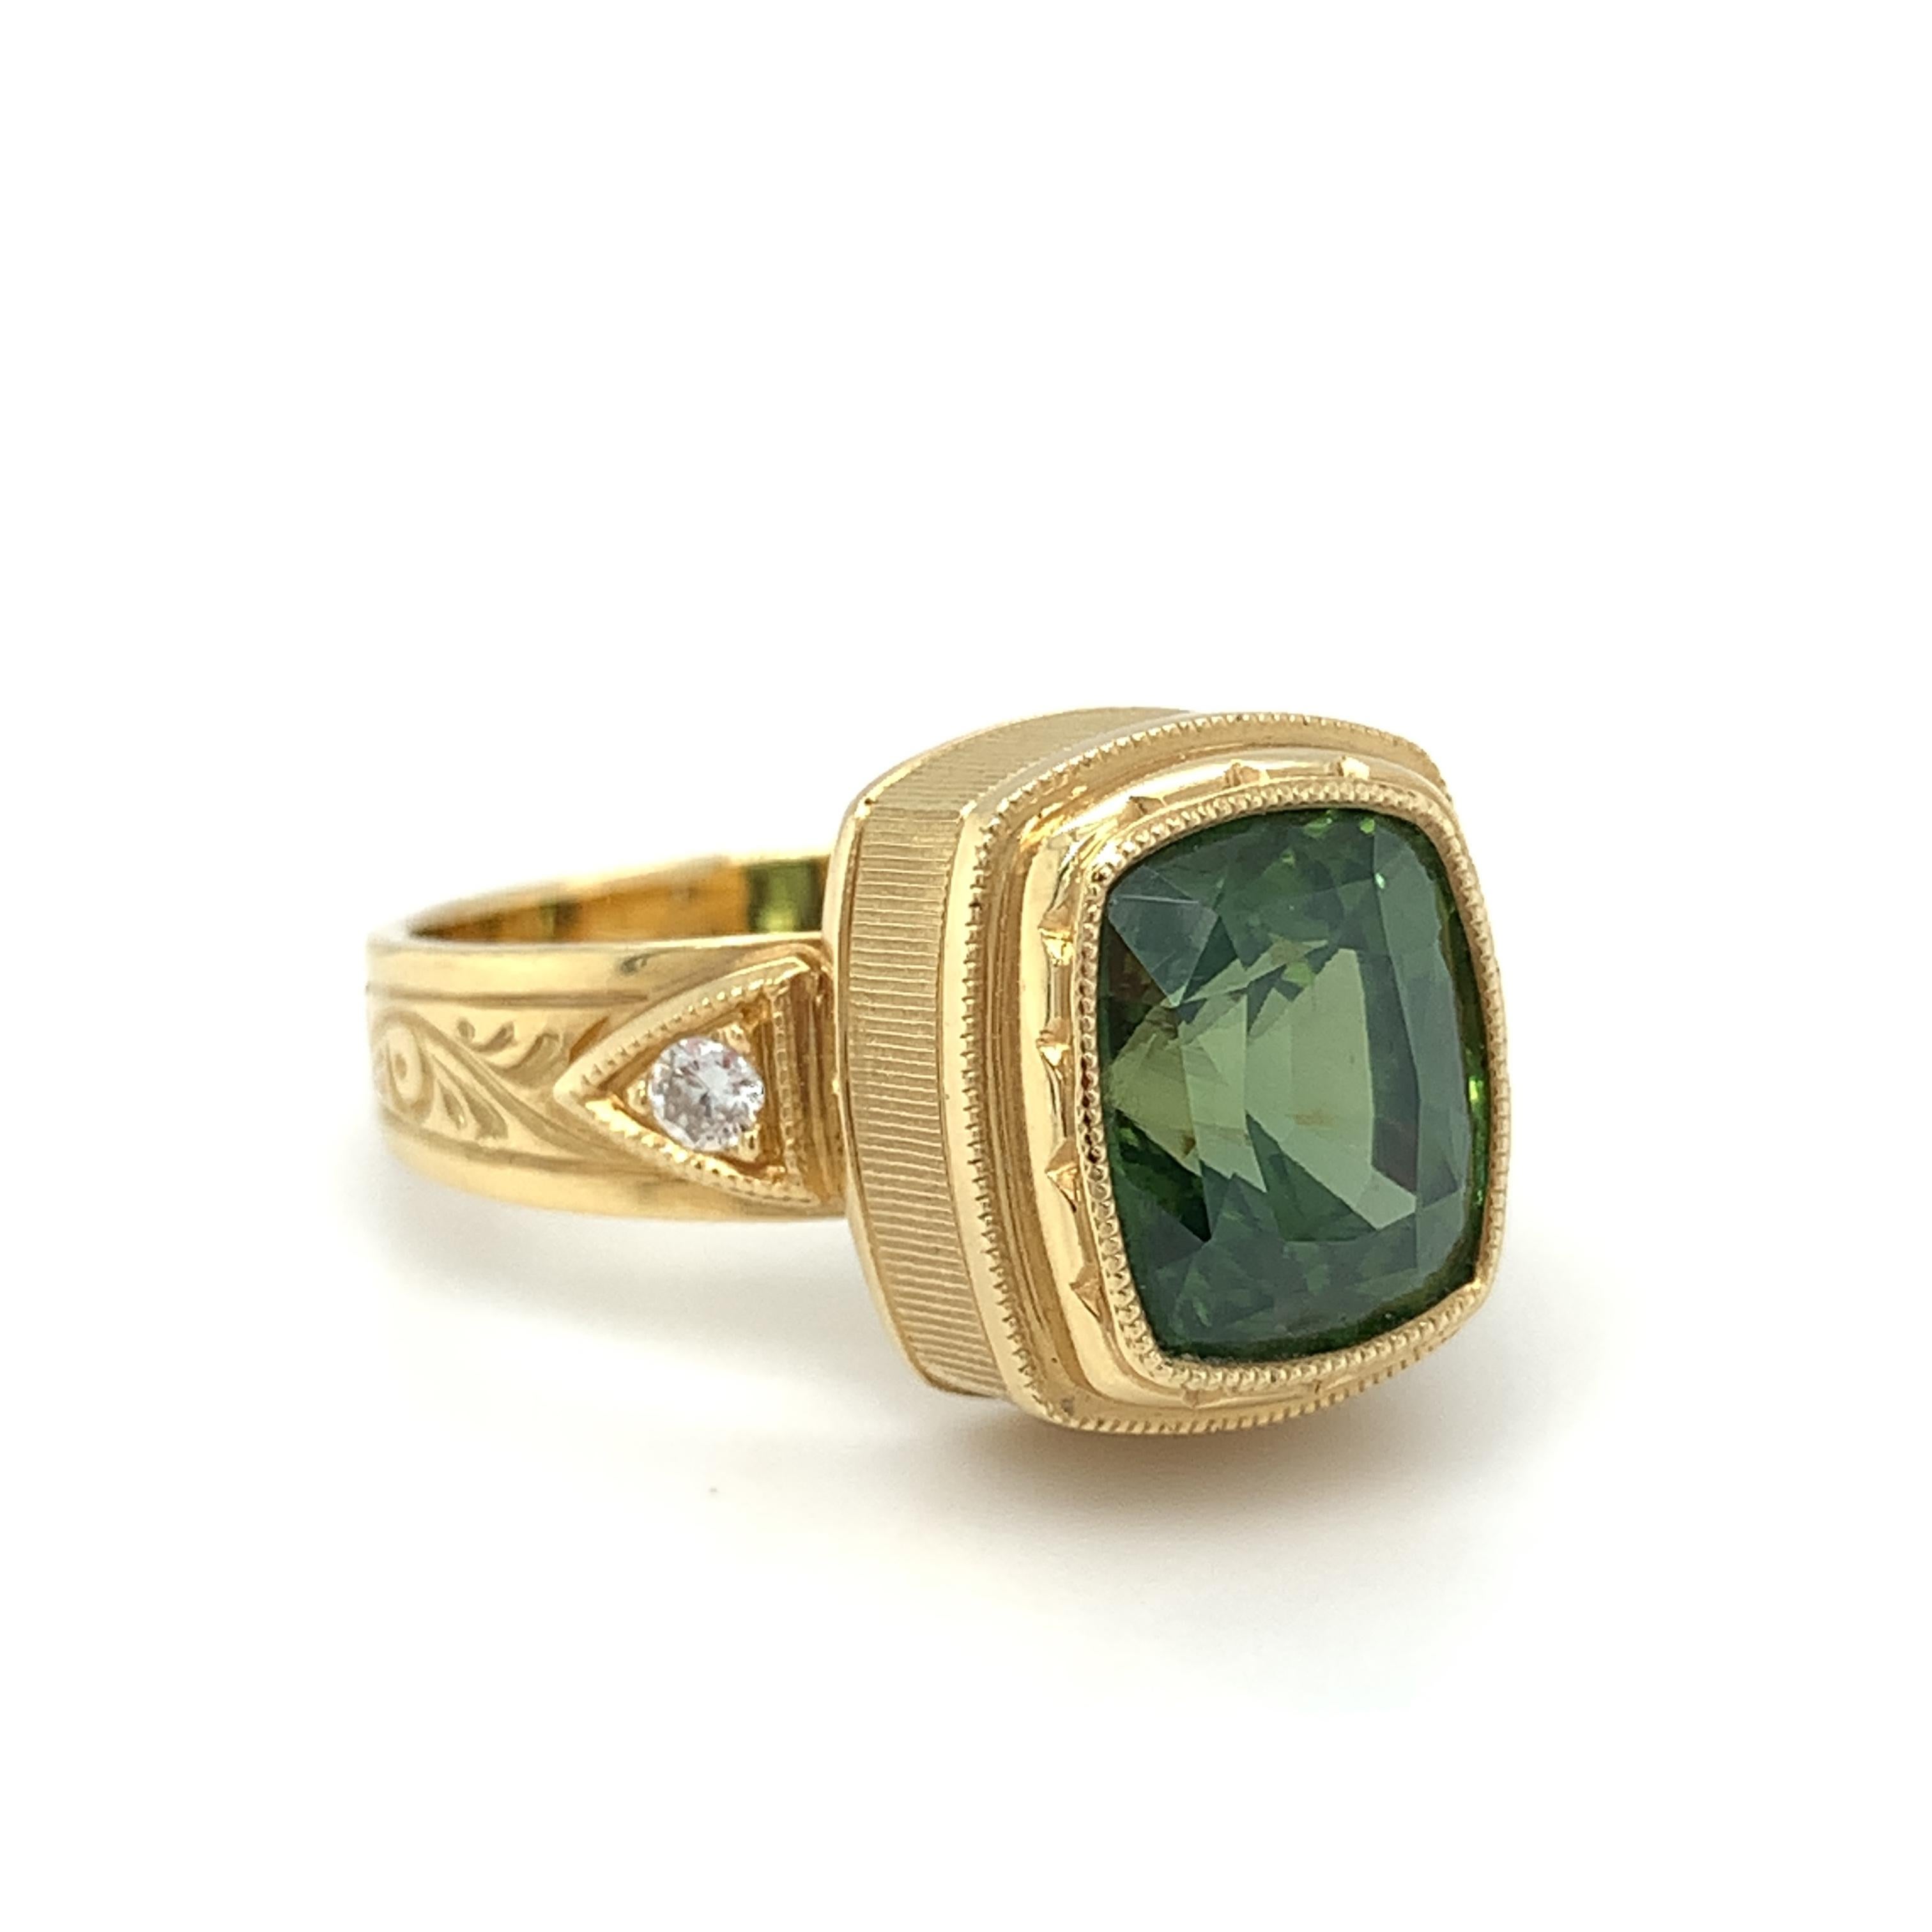 Artisan 5.38 ct. Green Zircon and Diamond Engraved Band Ring in 18k Yellow Gold For Sale